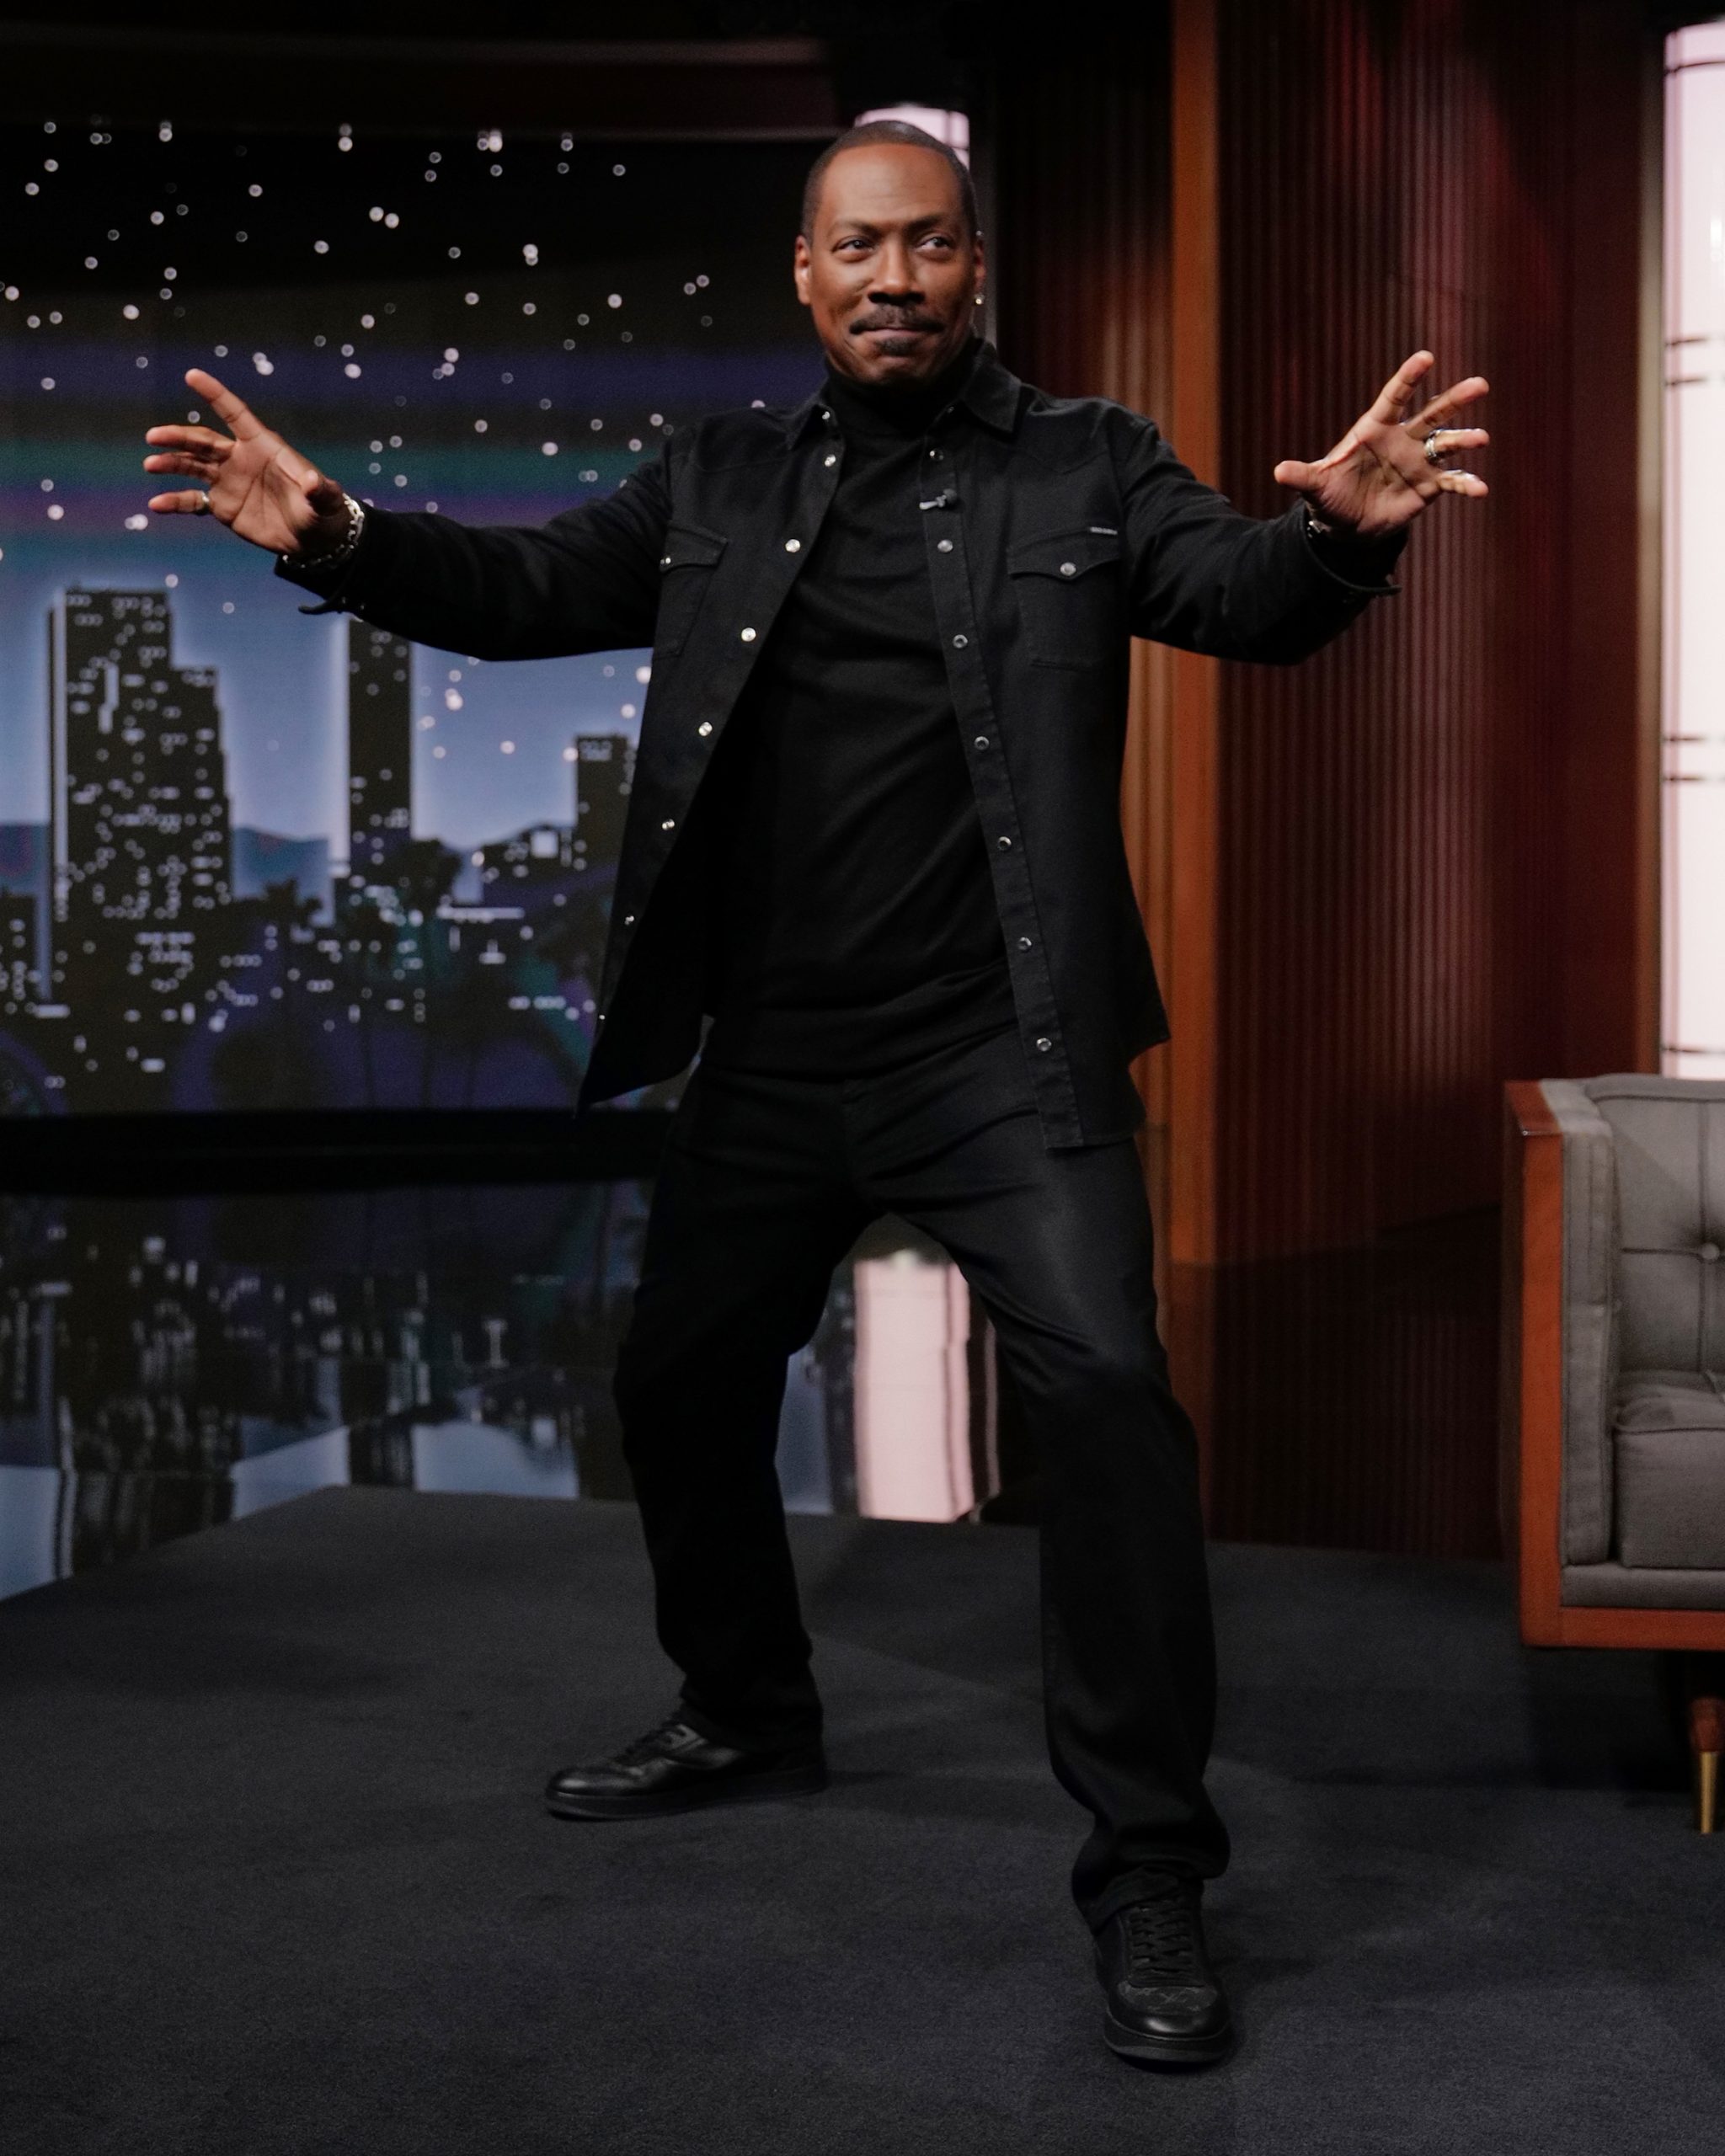 Eddie Murphy Talks Getting Snowed In At Rick James House, You People Movie And More On ‘Jimmy Kimmel’